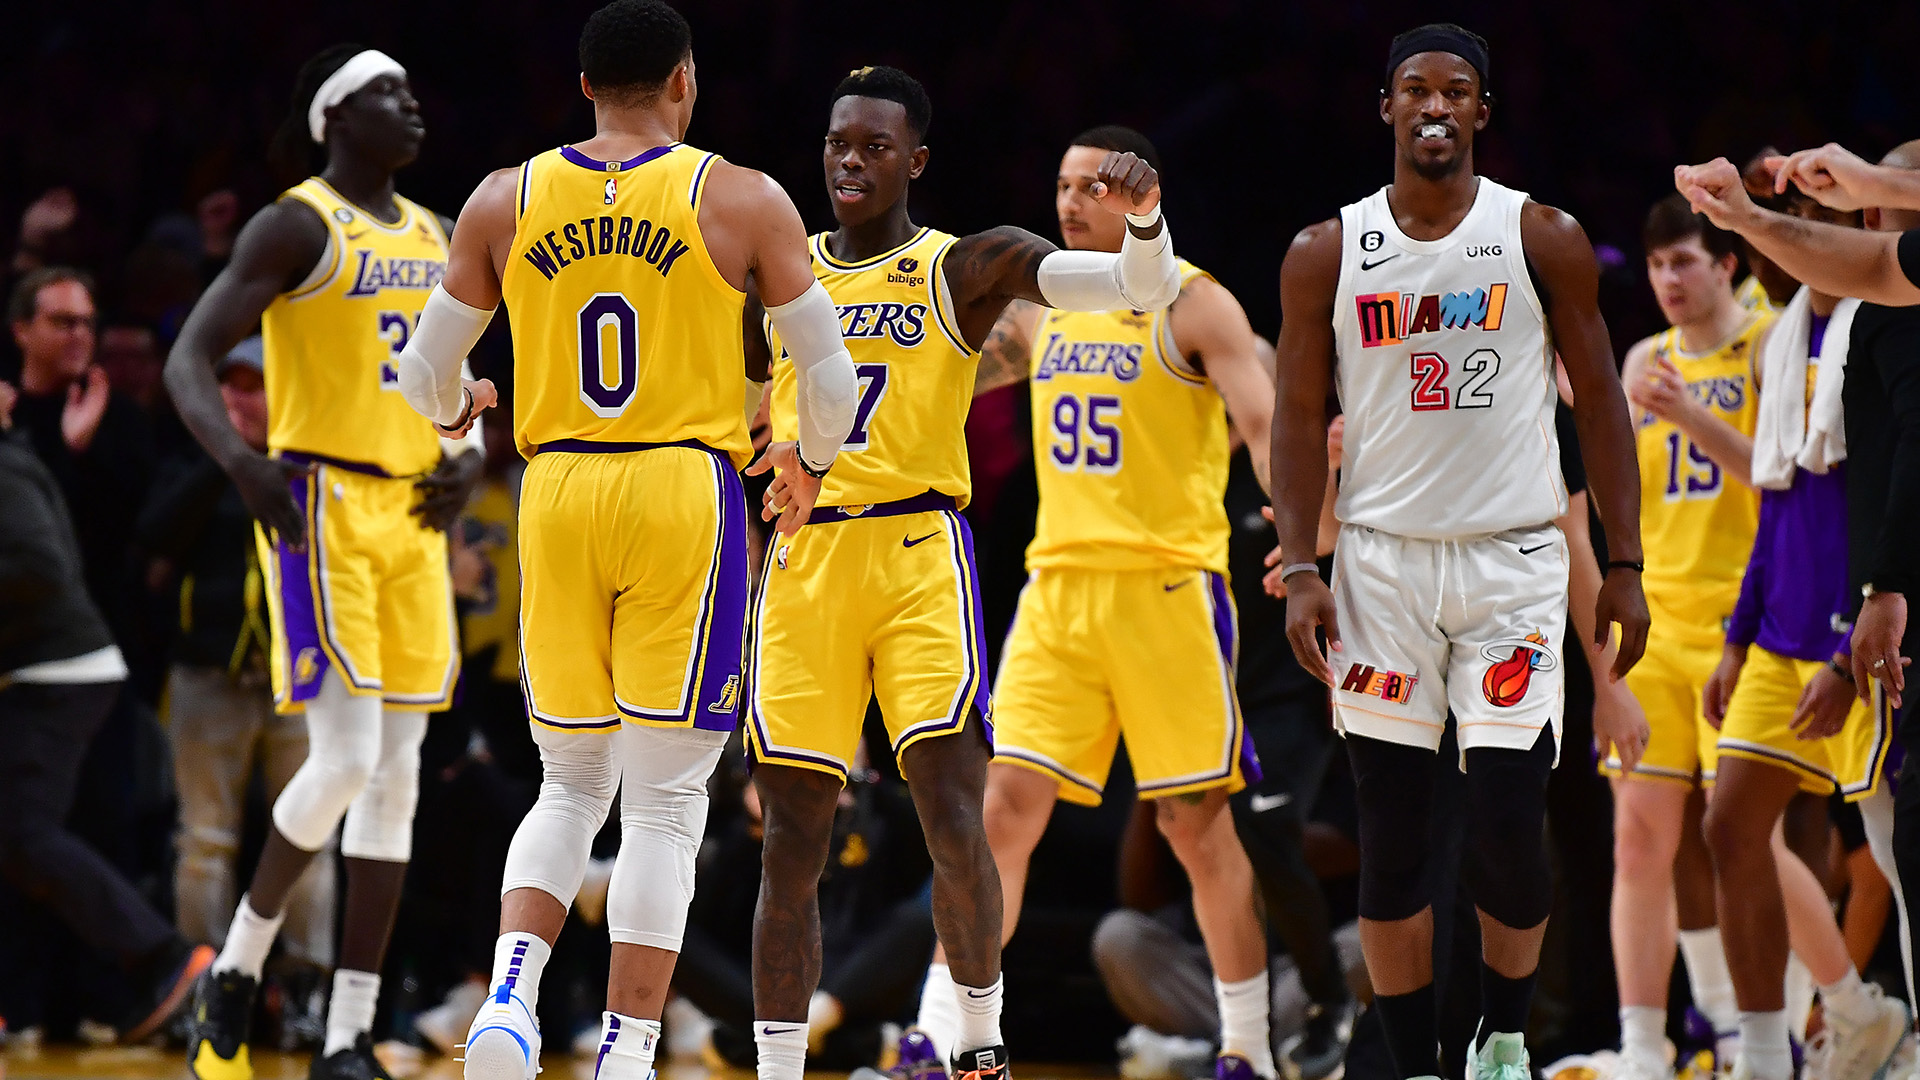 Spectrum SportsNet on X: The #Lakers have had some 🔥 jerseys